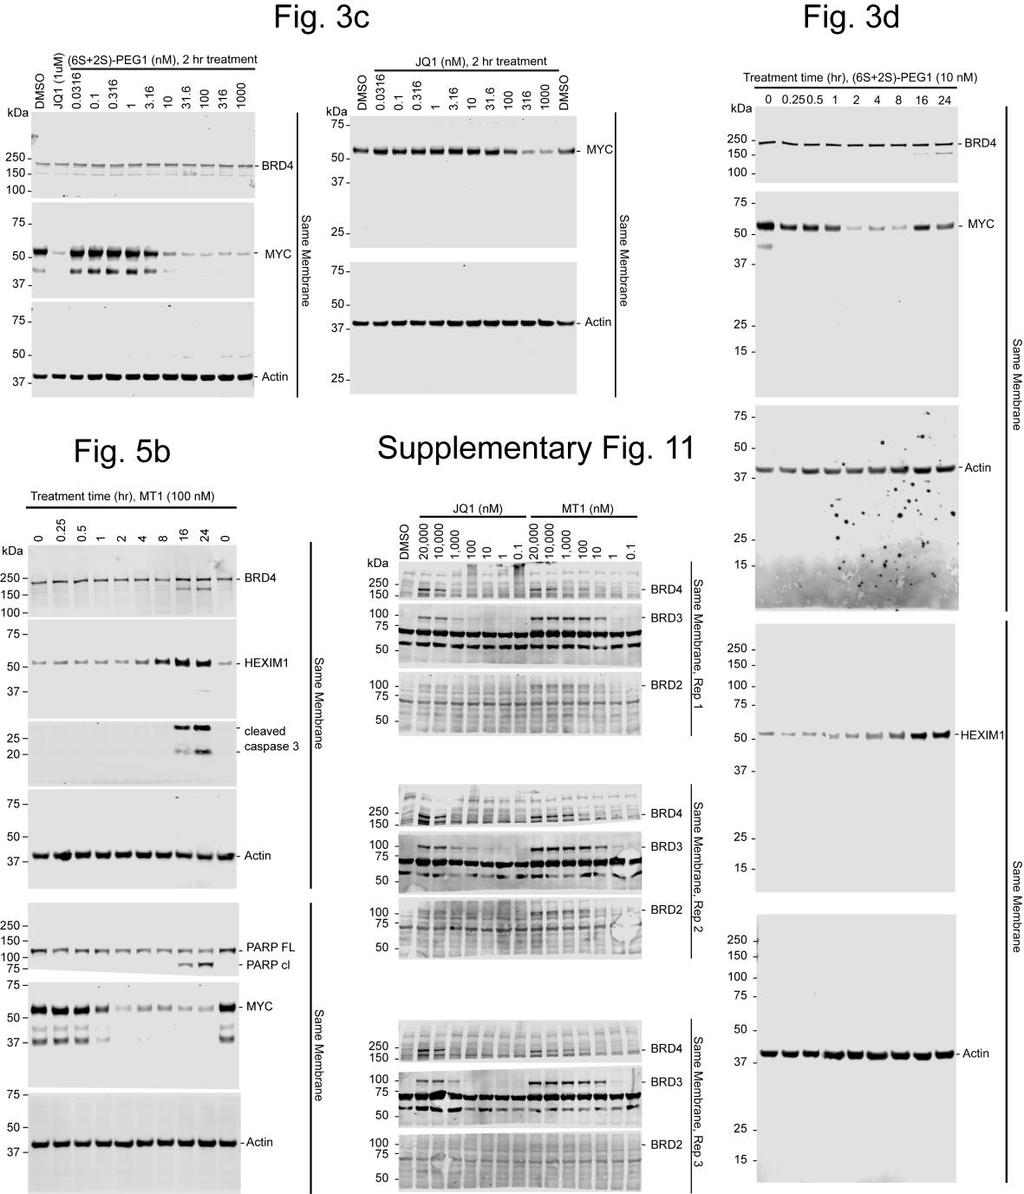 Supplementary Figure 15 Full western blots from figures 3c, 3d, 5b, and supplementary figure 11. Doses and time points are indicated above blots.